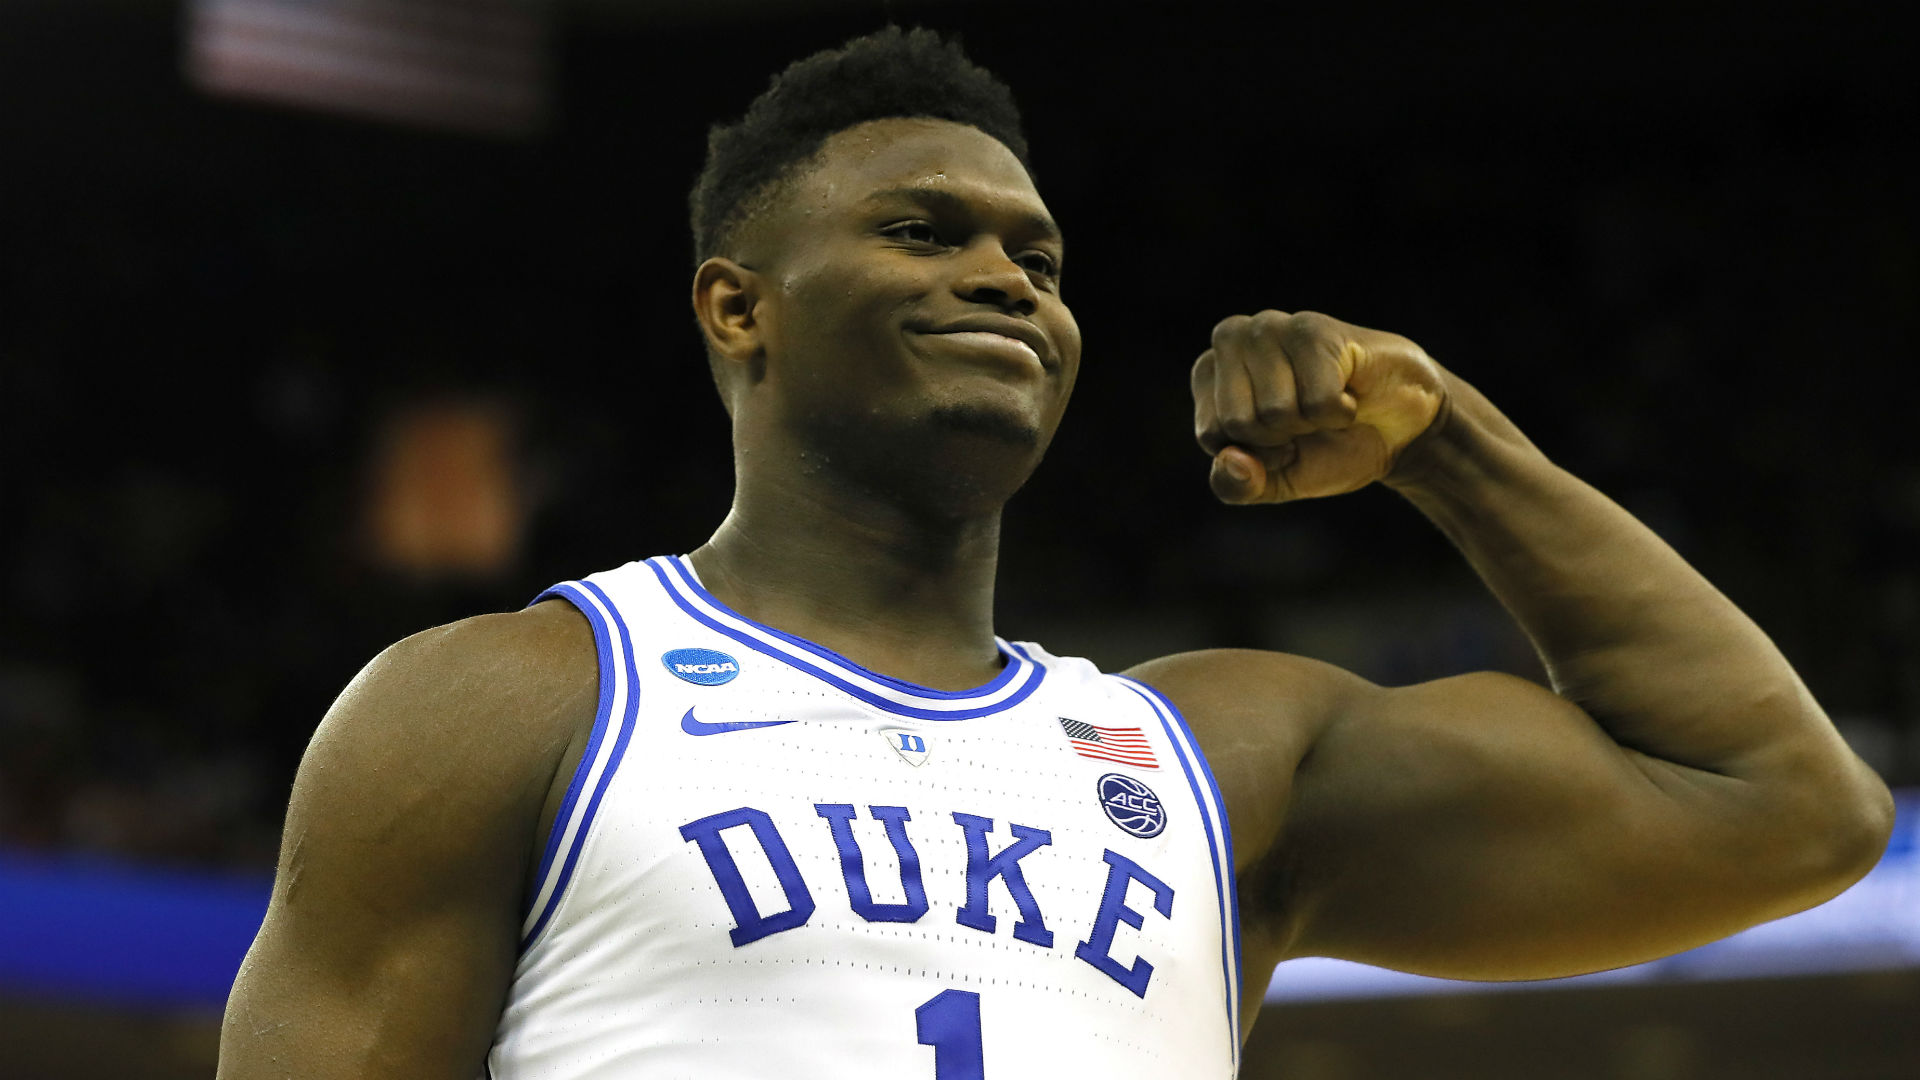 NBA Draft 2019: What are the best player comparisons for Zion Williamson? | NBA.com ...1920 x 1080